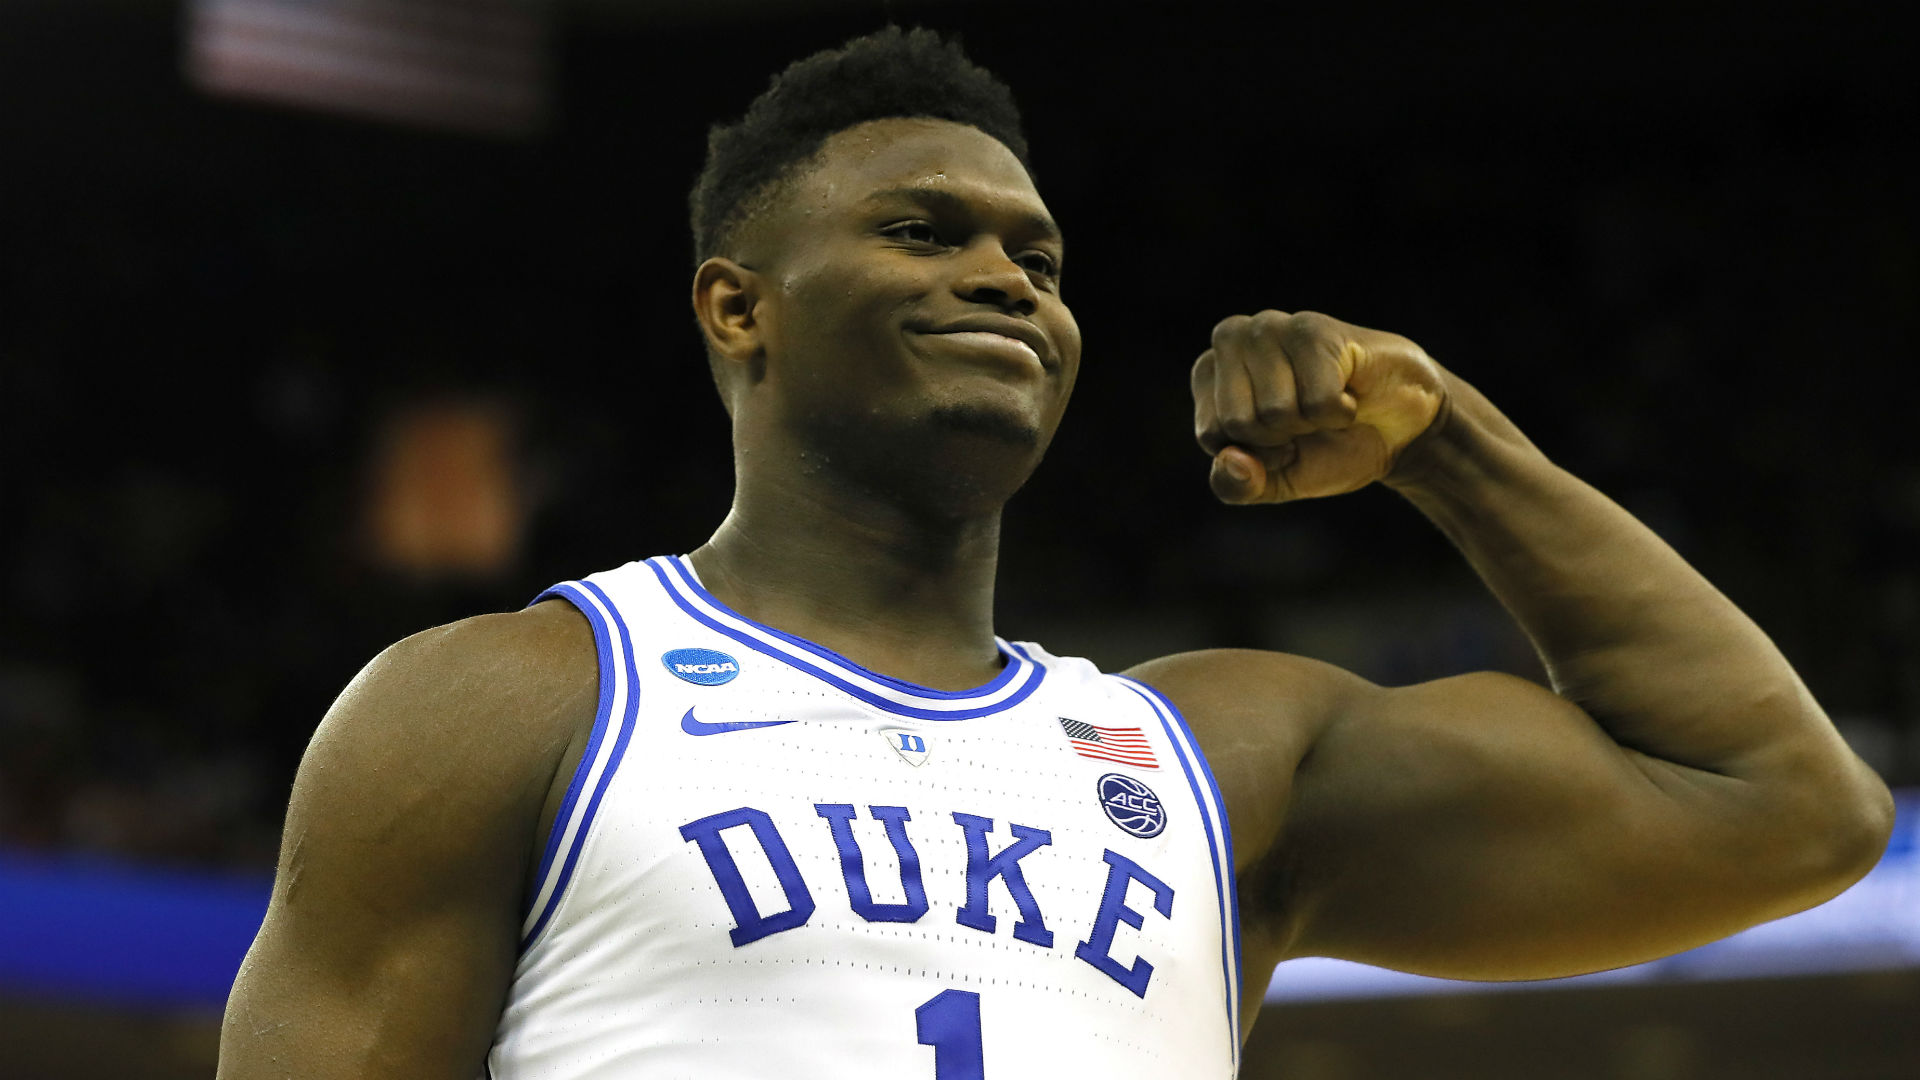 NBA Draft 2019: What are the best player comparisons for Zion Williamson? | NBA.com ...1920 x 1080